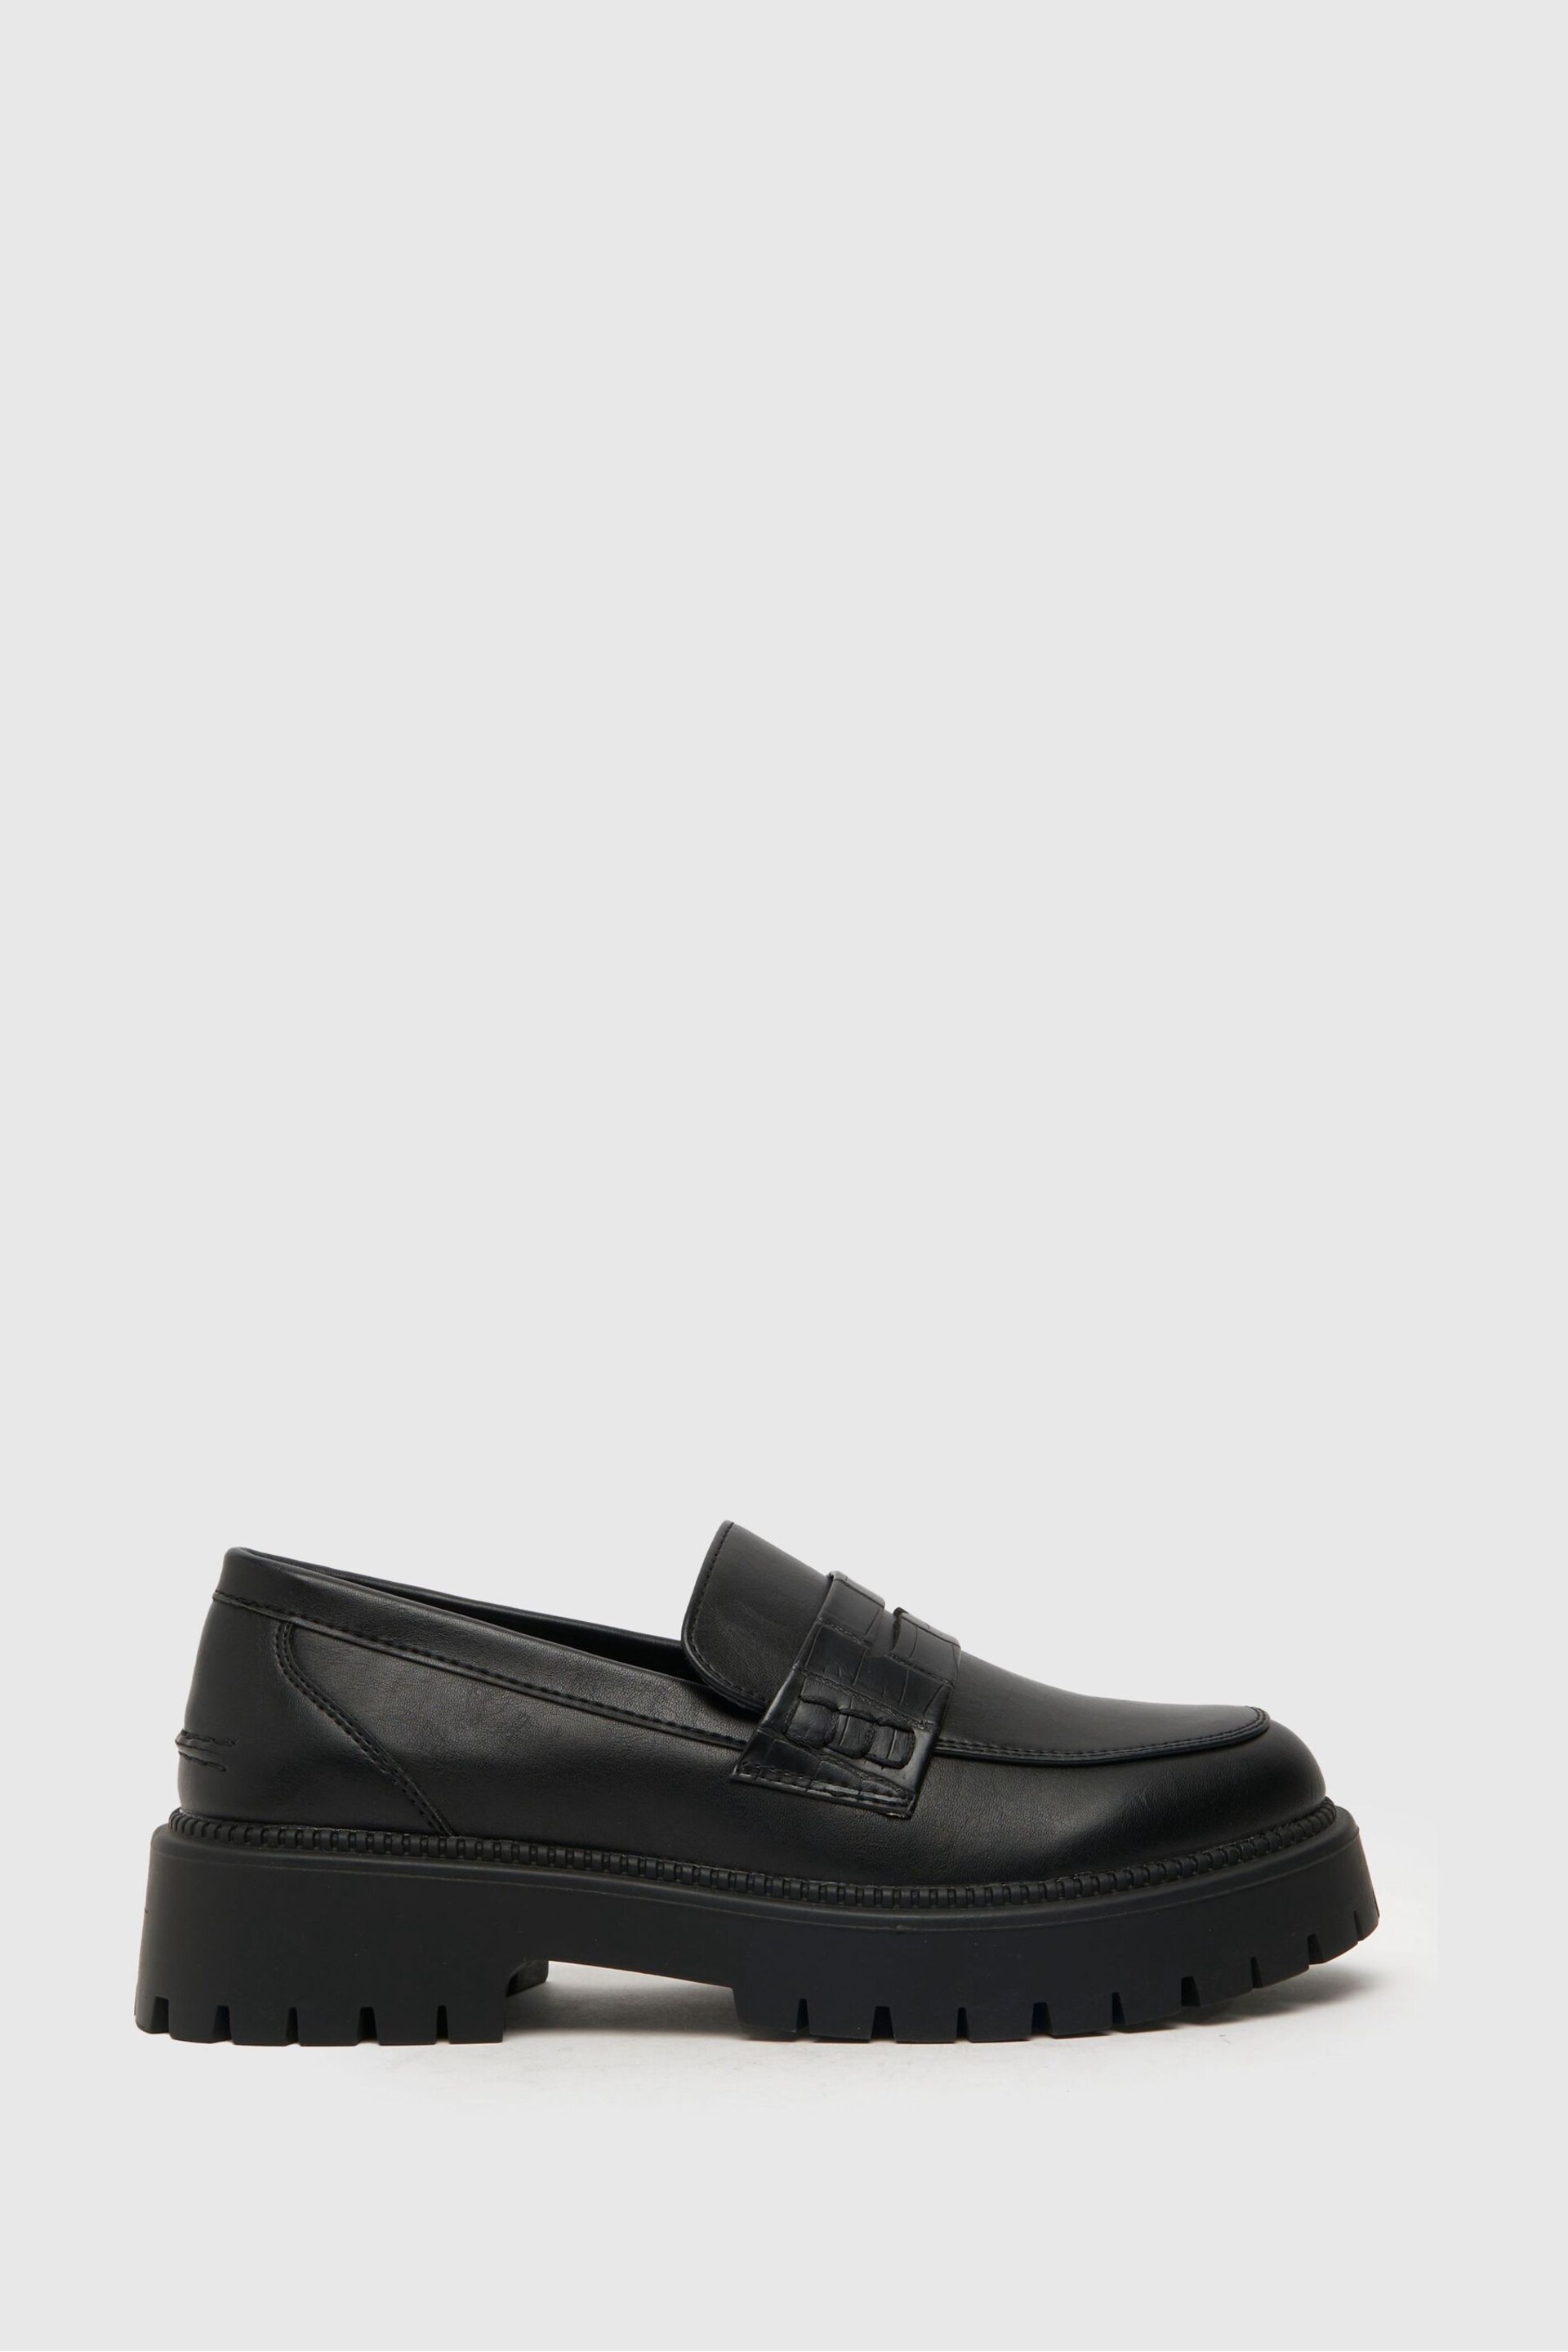 Schuh Leanna Chunky Loafers - Image 1 of 4